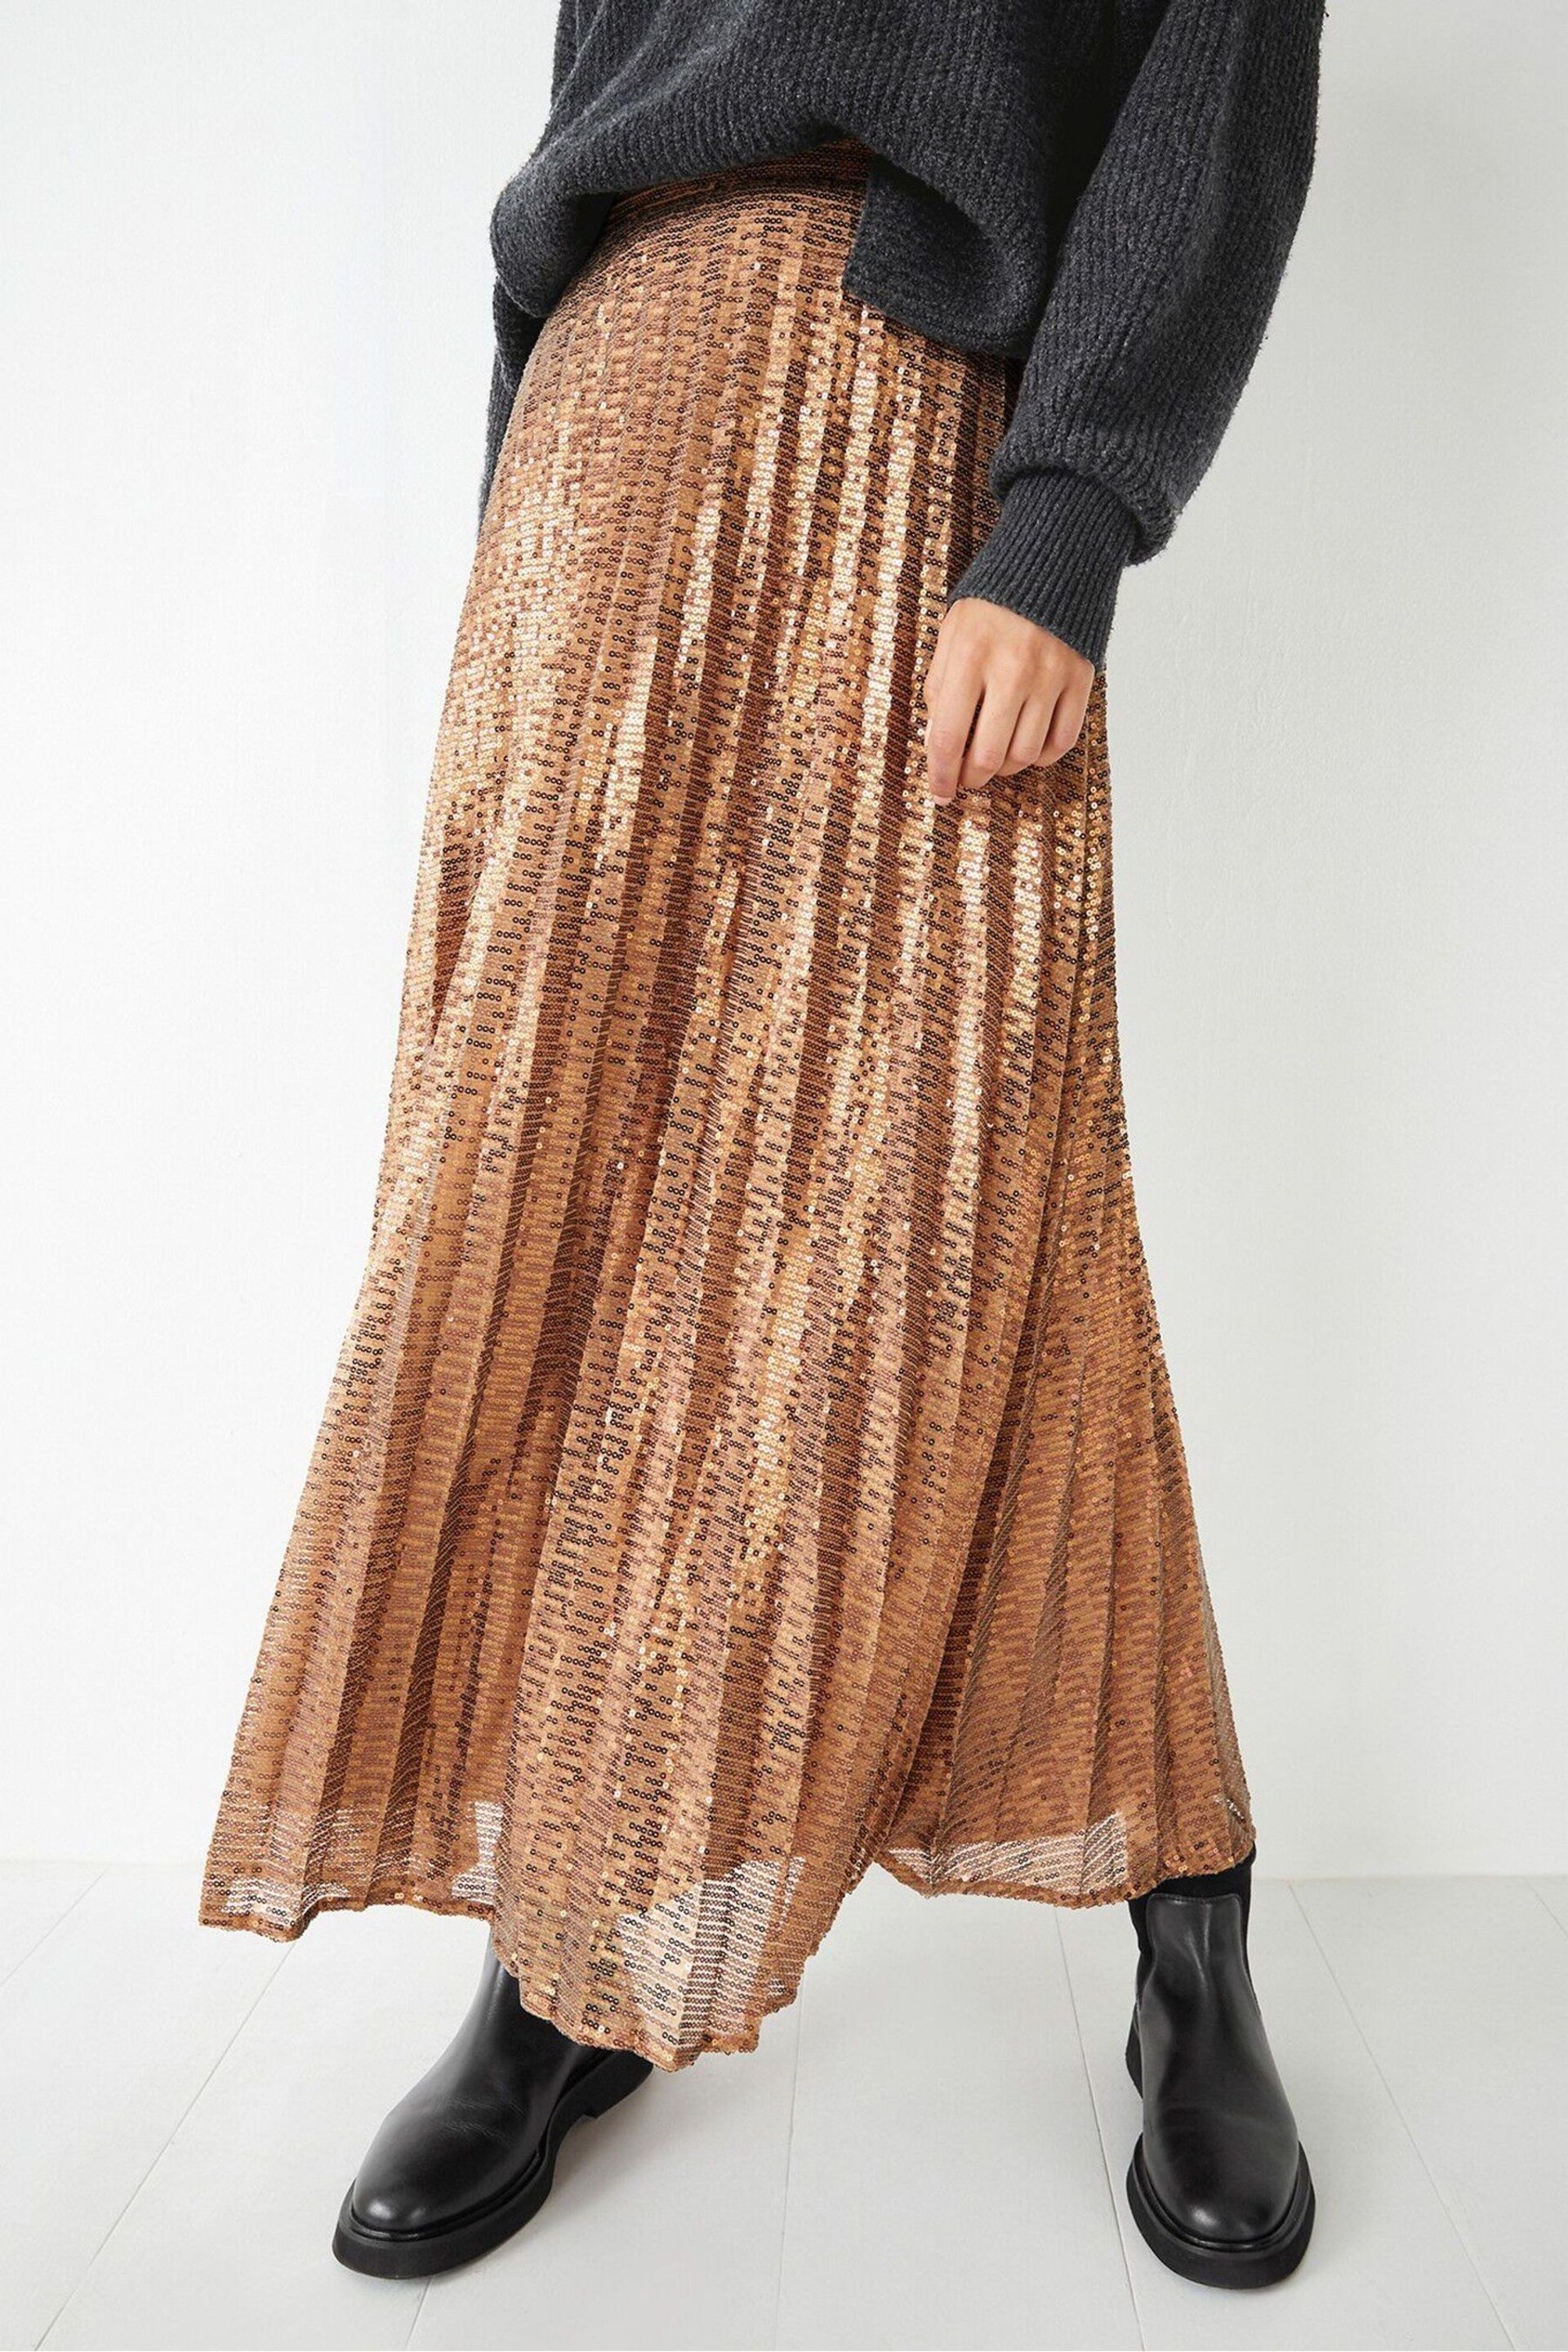 Hush Gold Clio Pleated Sequin Skirt - Image 2 of 5